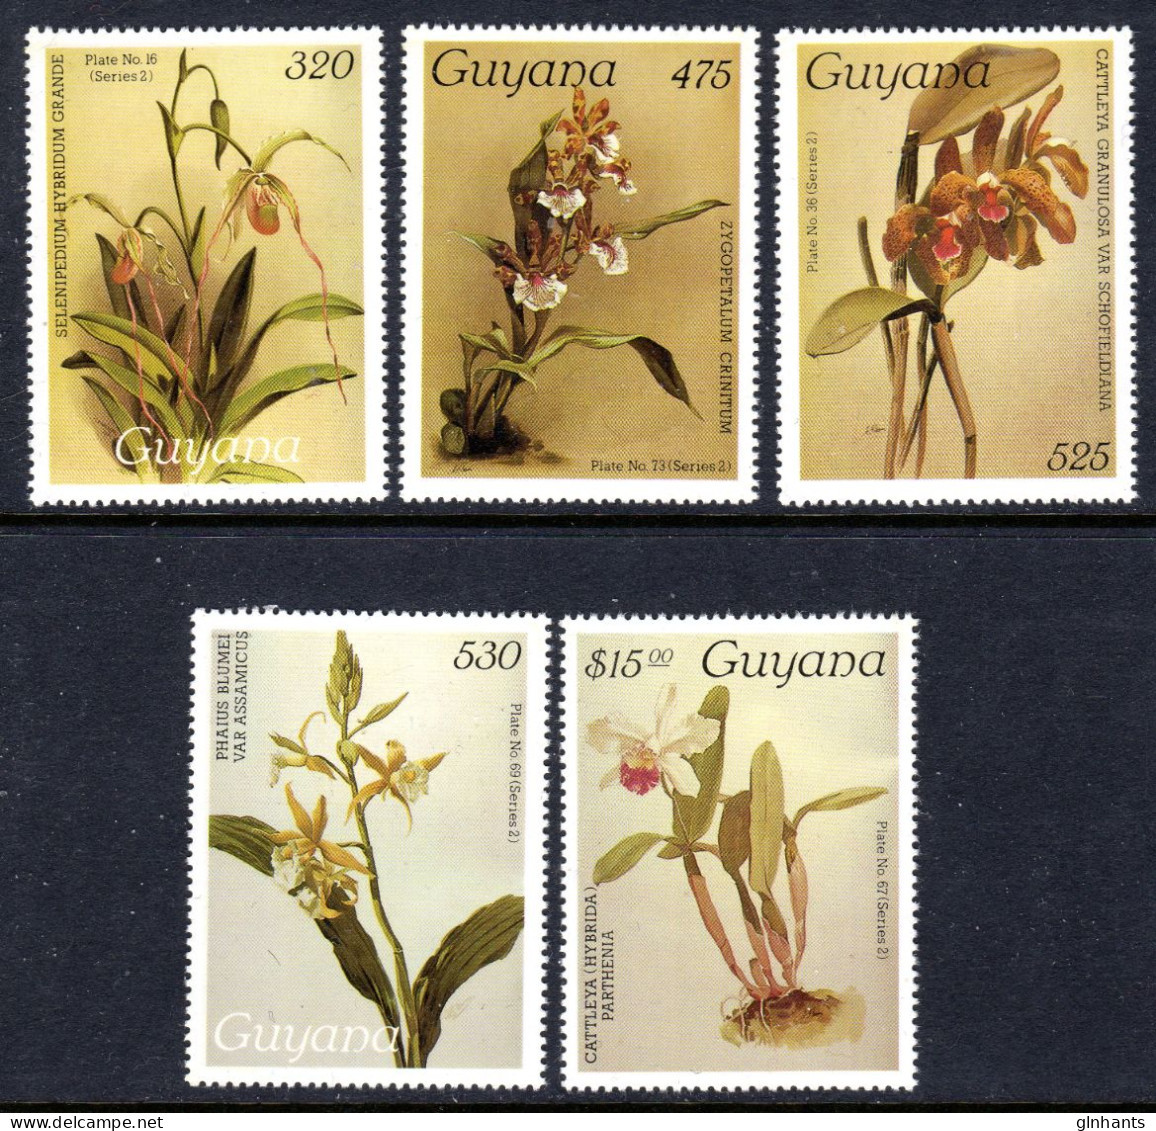 GUYANA - 1988 REICHENBACHIA ORCHIDS 29th ISSUE COMPLETE SET (5V) FIME MNH ** SG2314-2318 - Guyane (1966-...)